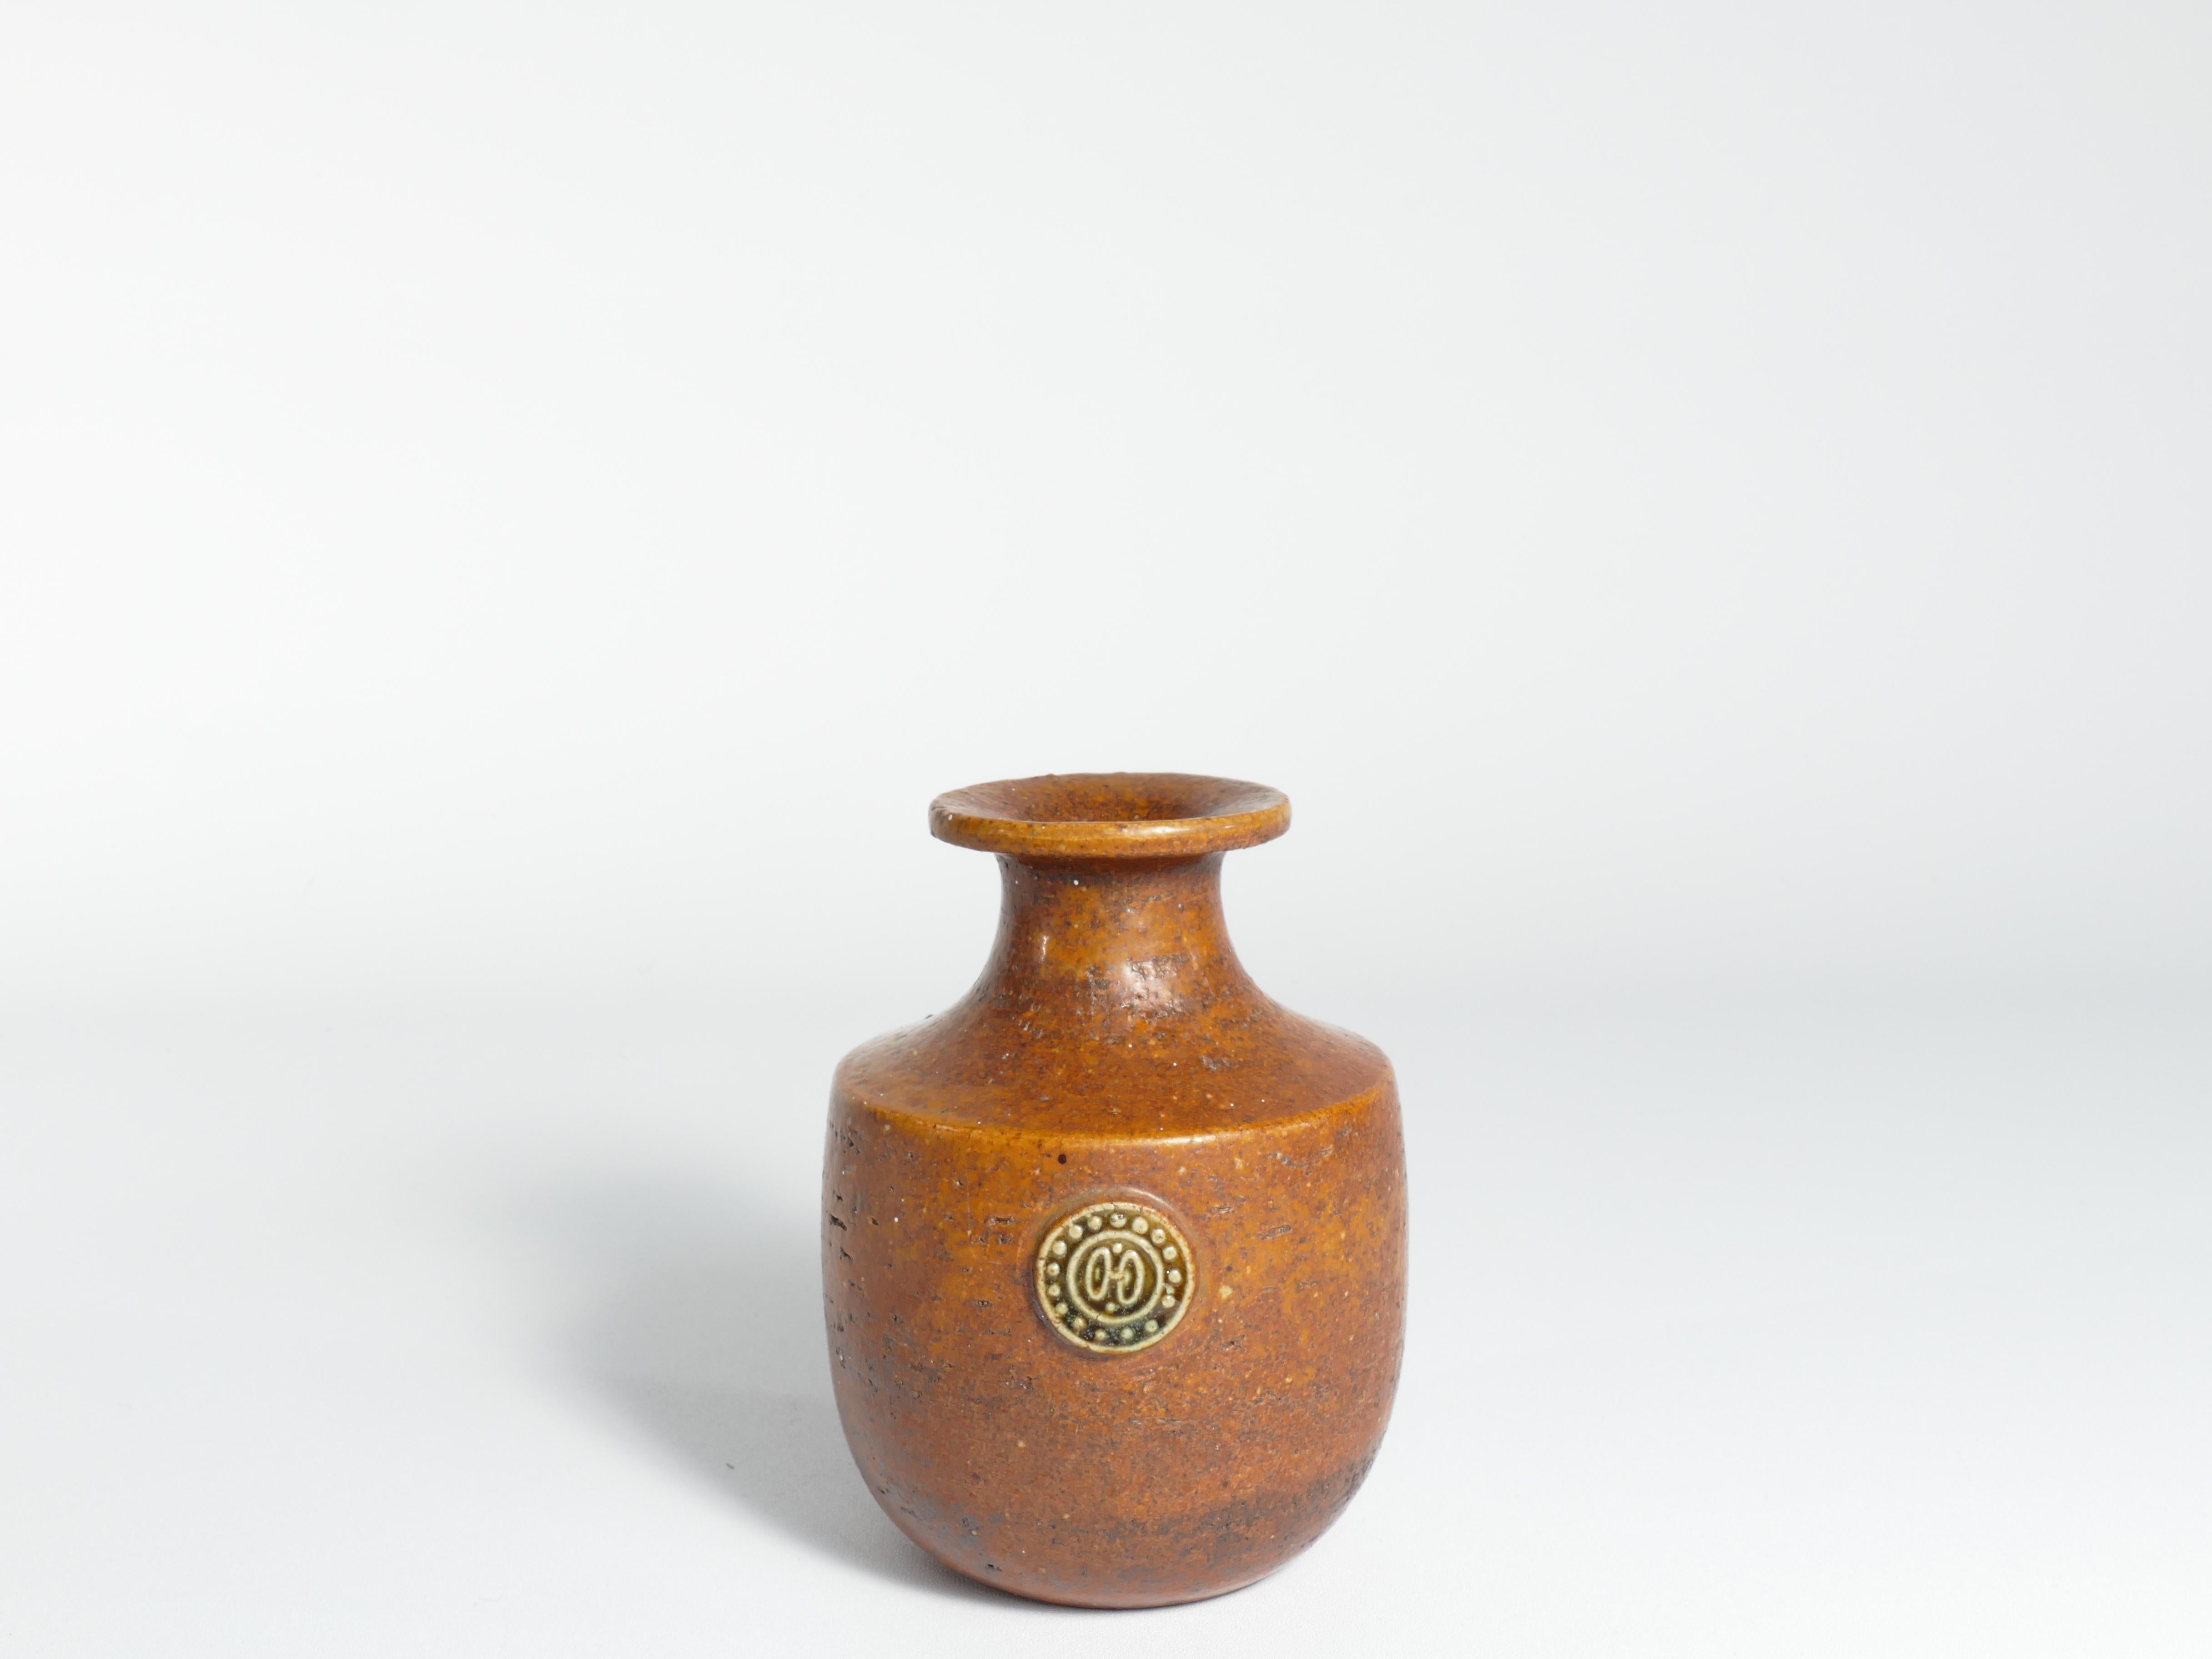 Sven Wejsfelt's vase boasts a robust, earthy form, adorned with a rich brown glaze and an intricate relief stamp. This chamotte creation hails from the 1970s and is a notable addition to the Sahara series. A true embodiment of rustic artistry, this